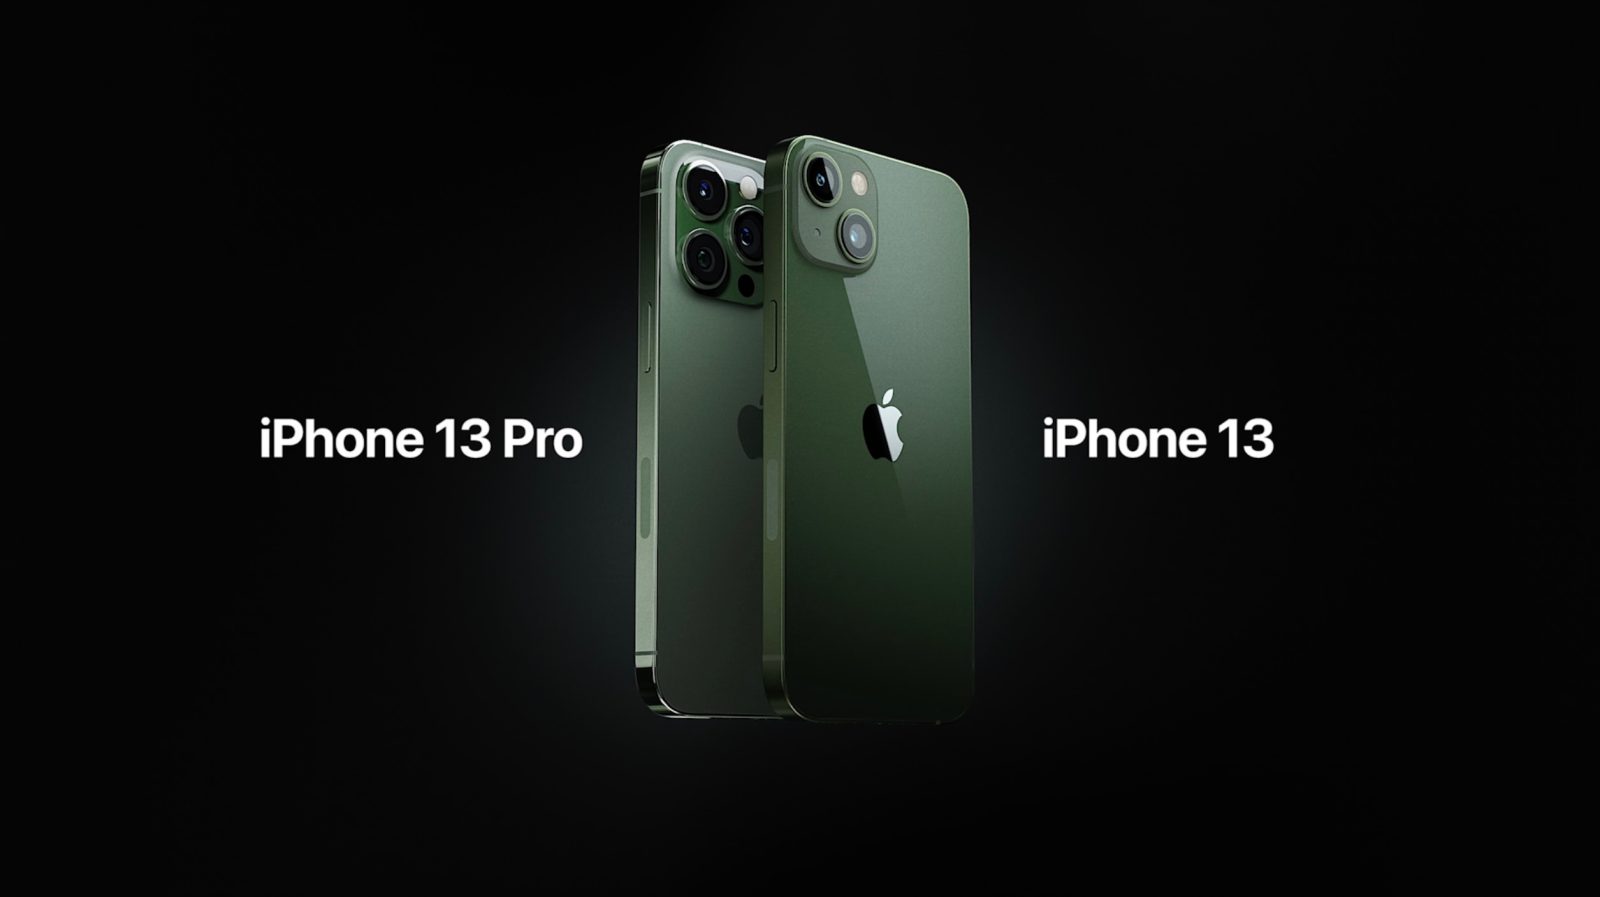 Apple announces new green iPhone 13 and alpine green iPhone 13 Pro